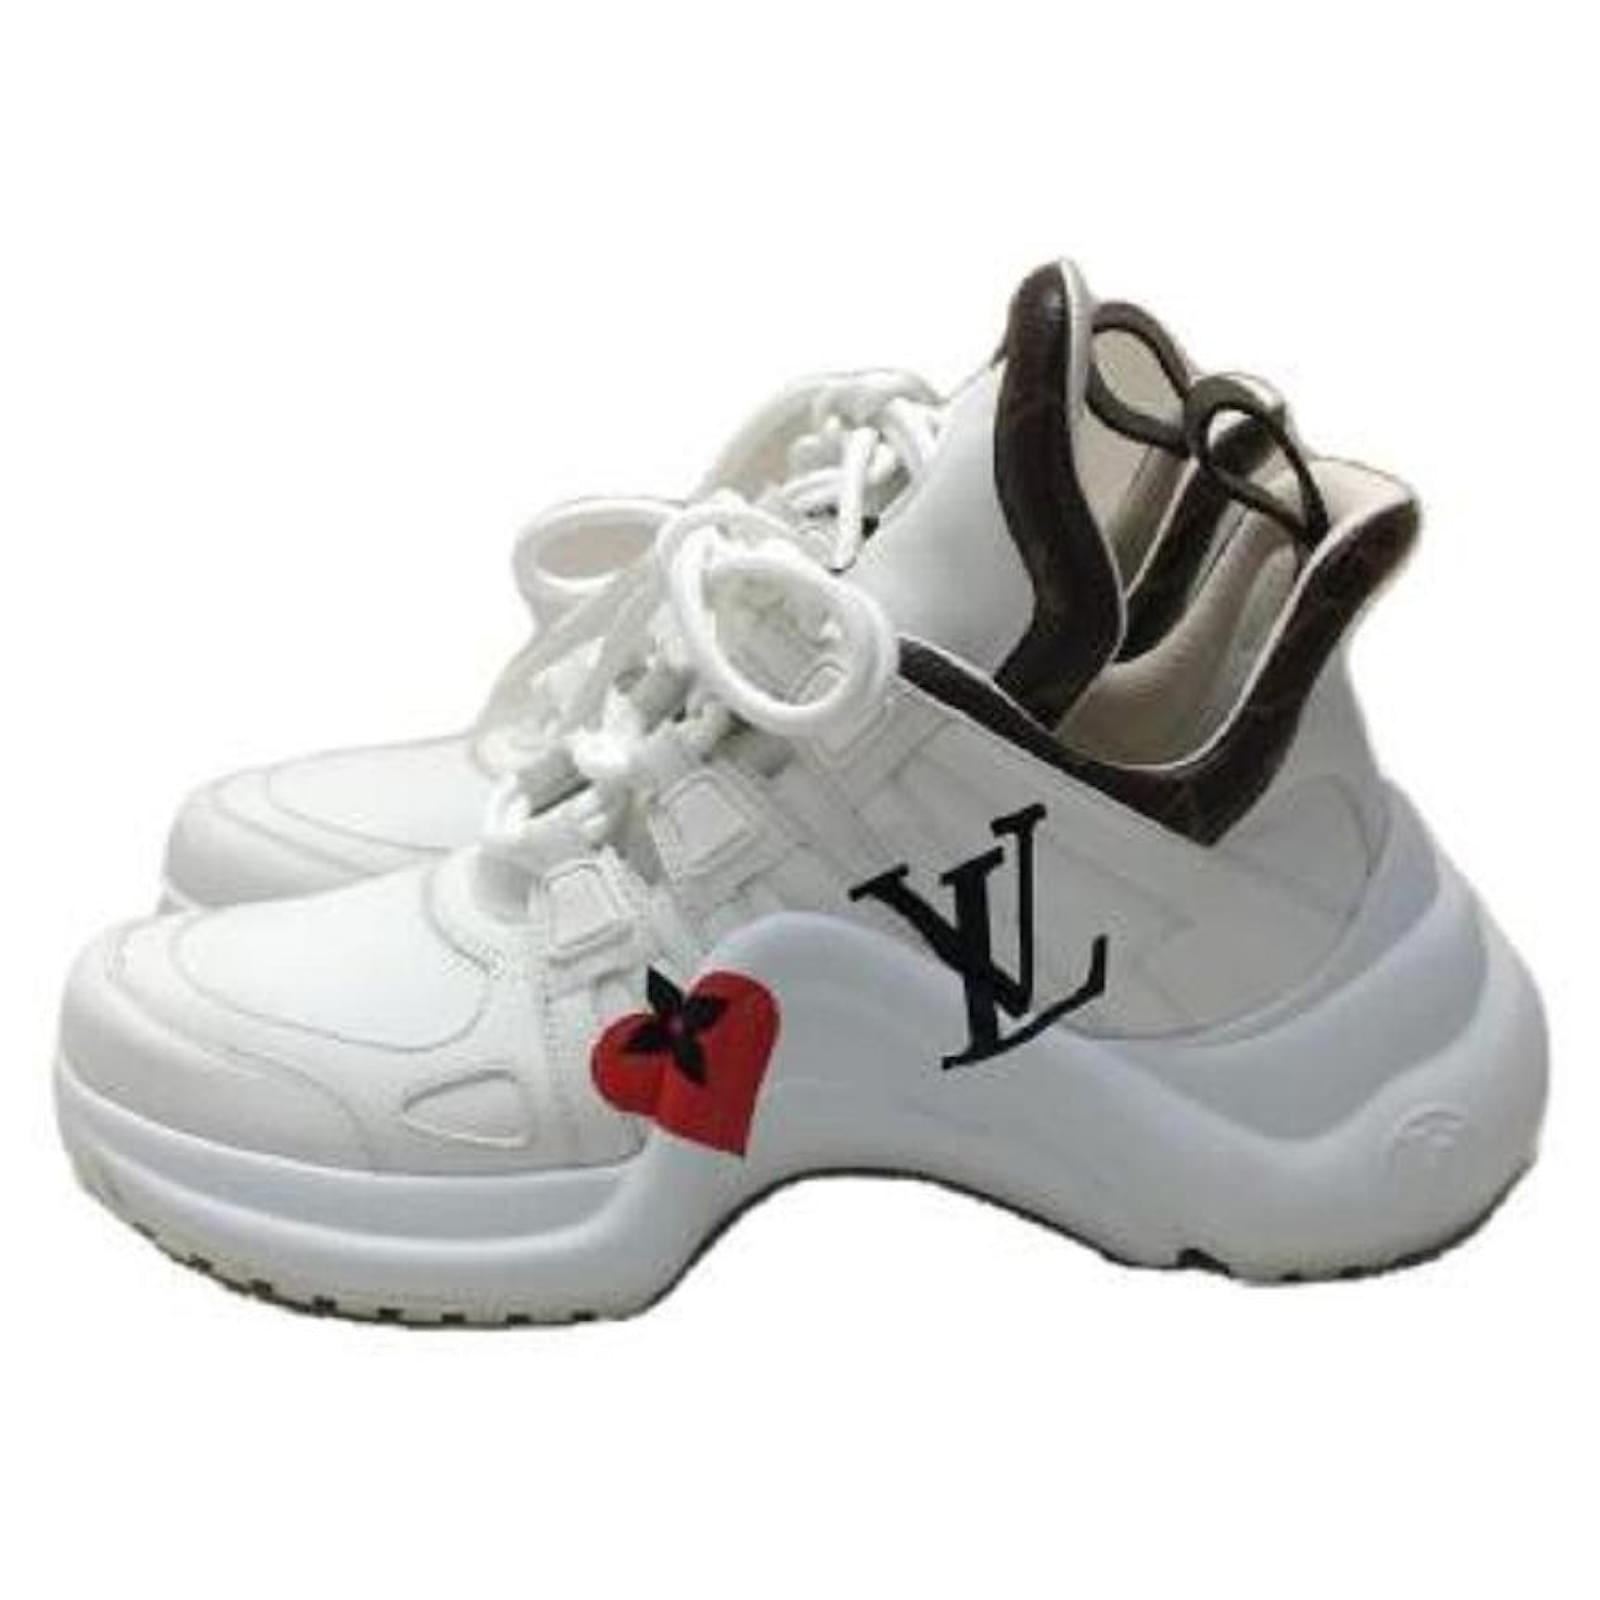 Used] LOUIS VUITTON High Cut Sneakers / Game On LV Arclight Line Sneakers  Monogram / 37.5 / leather White ref.510573 - Joli Closet